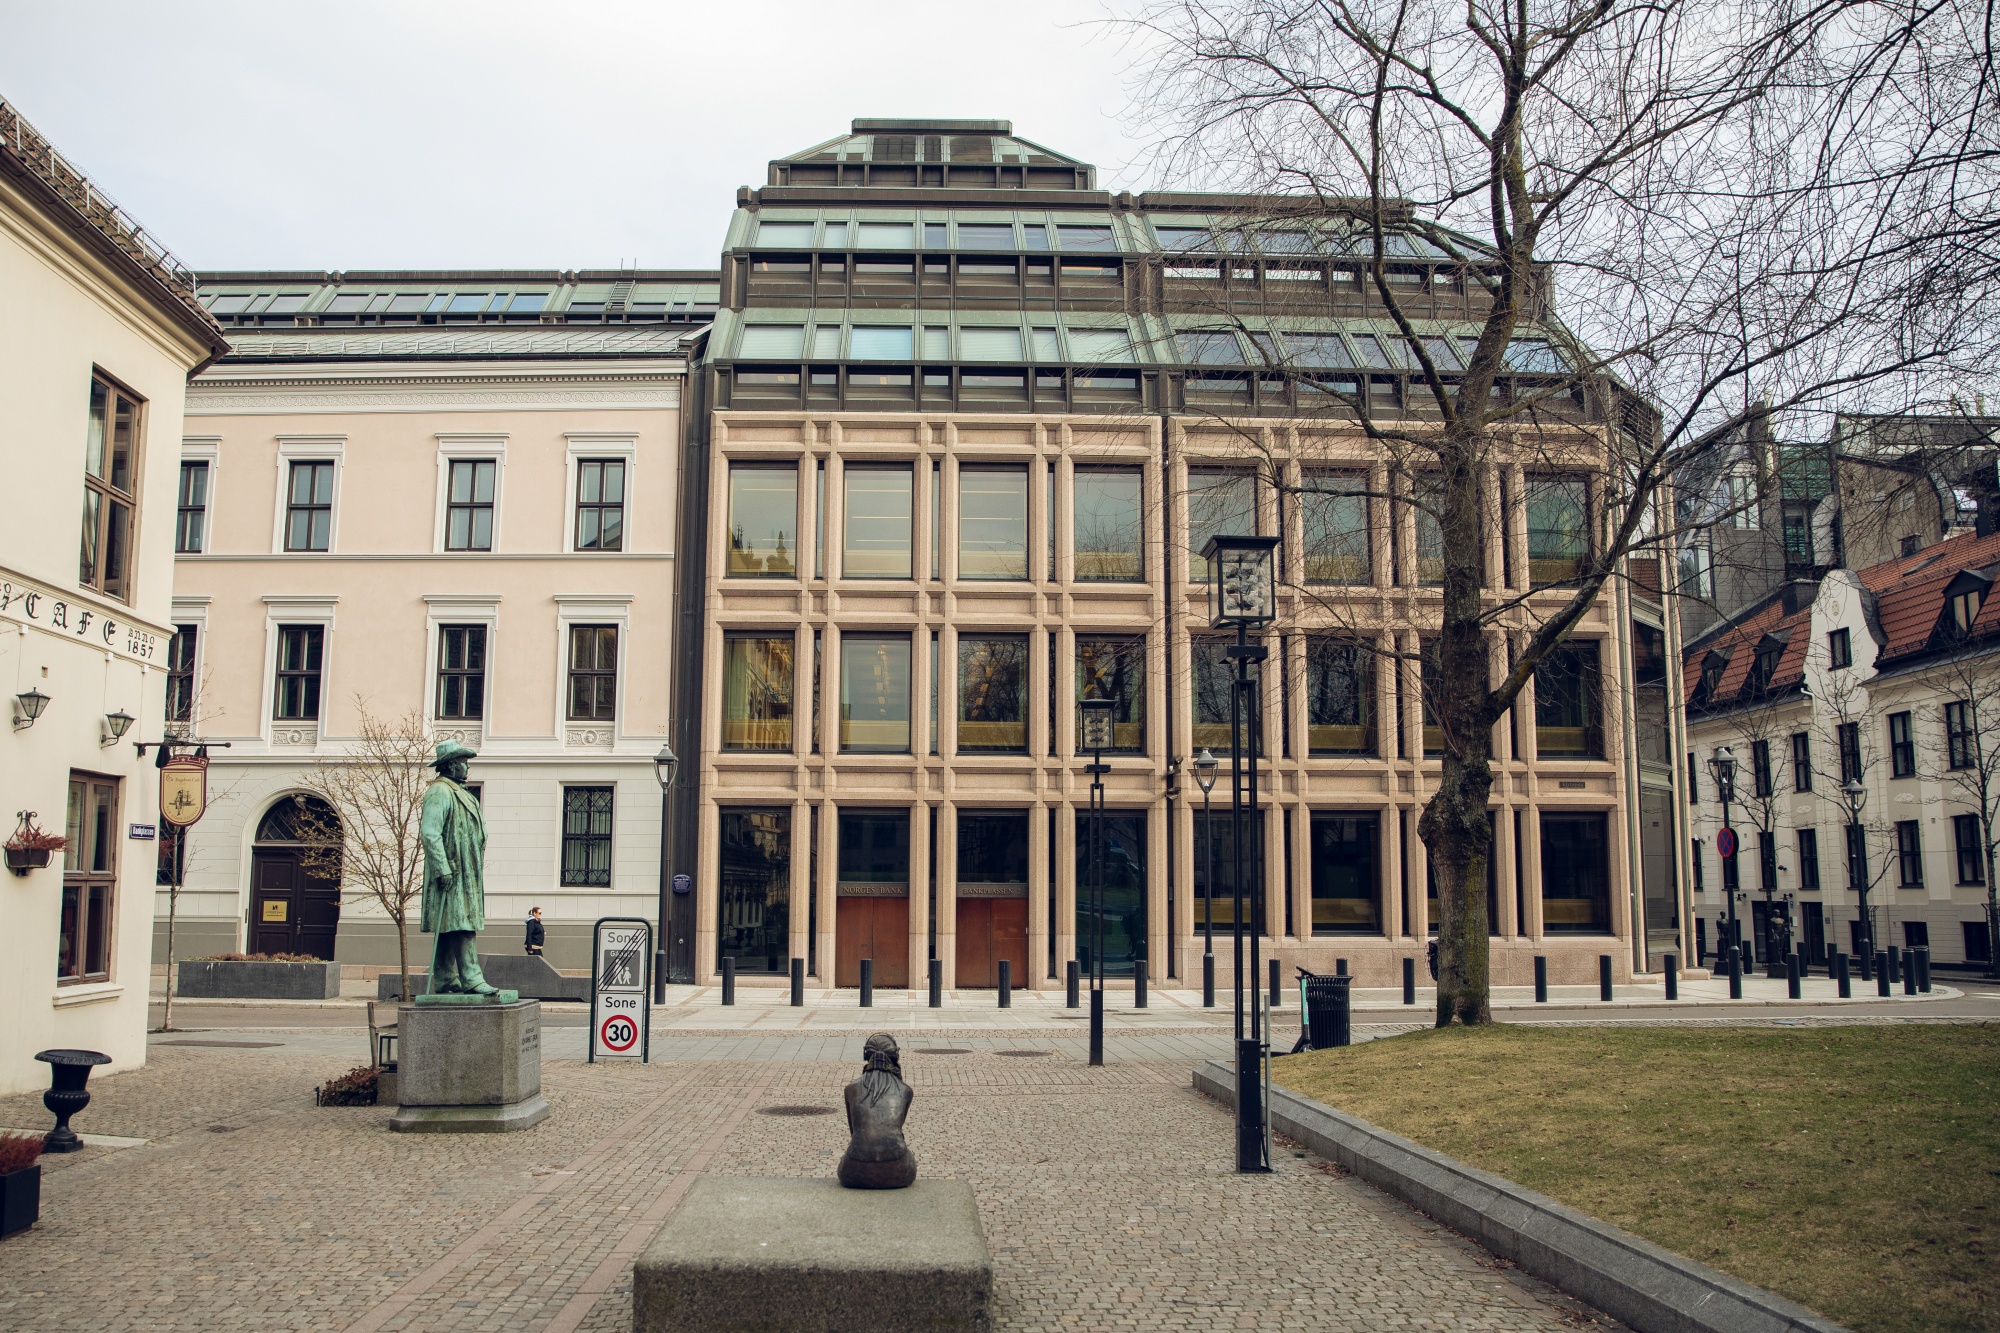 Norway hikes interest rates, with more expected